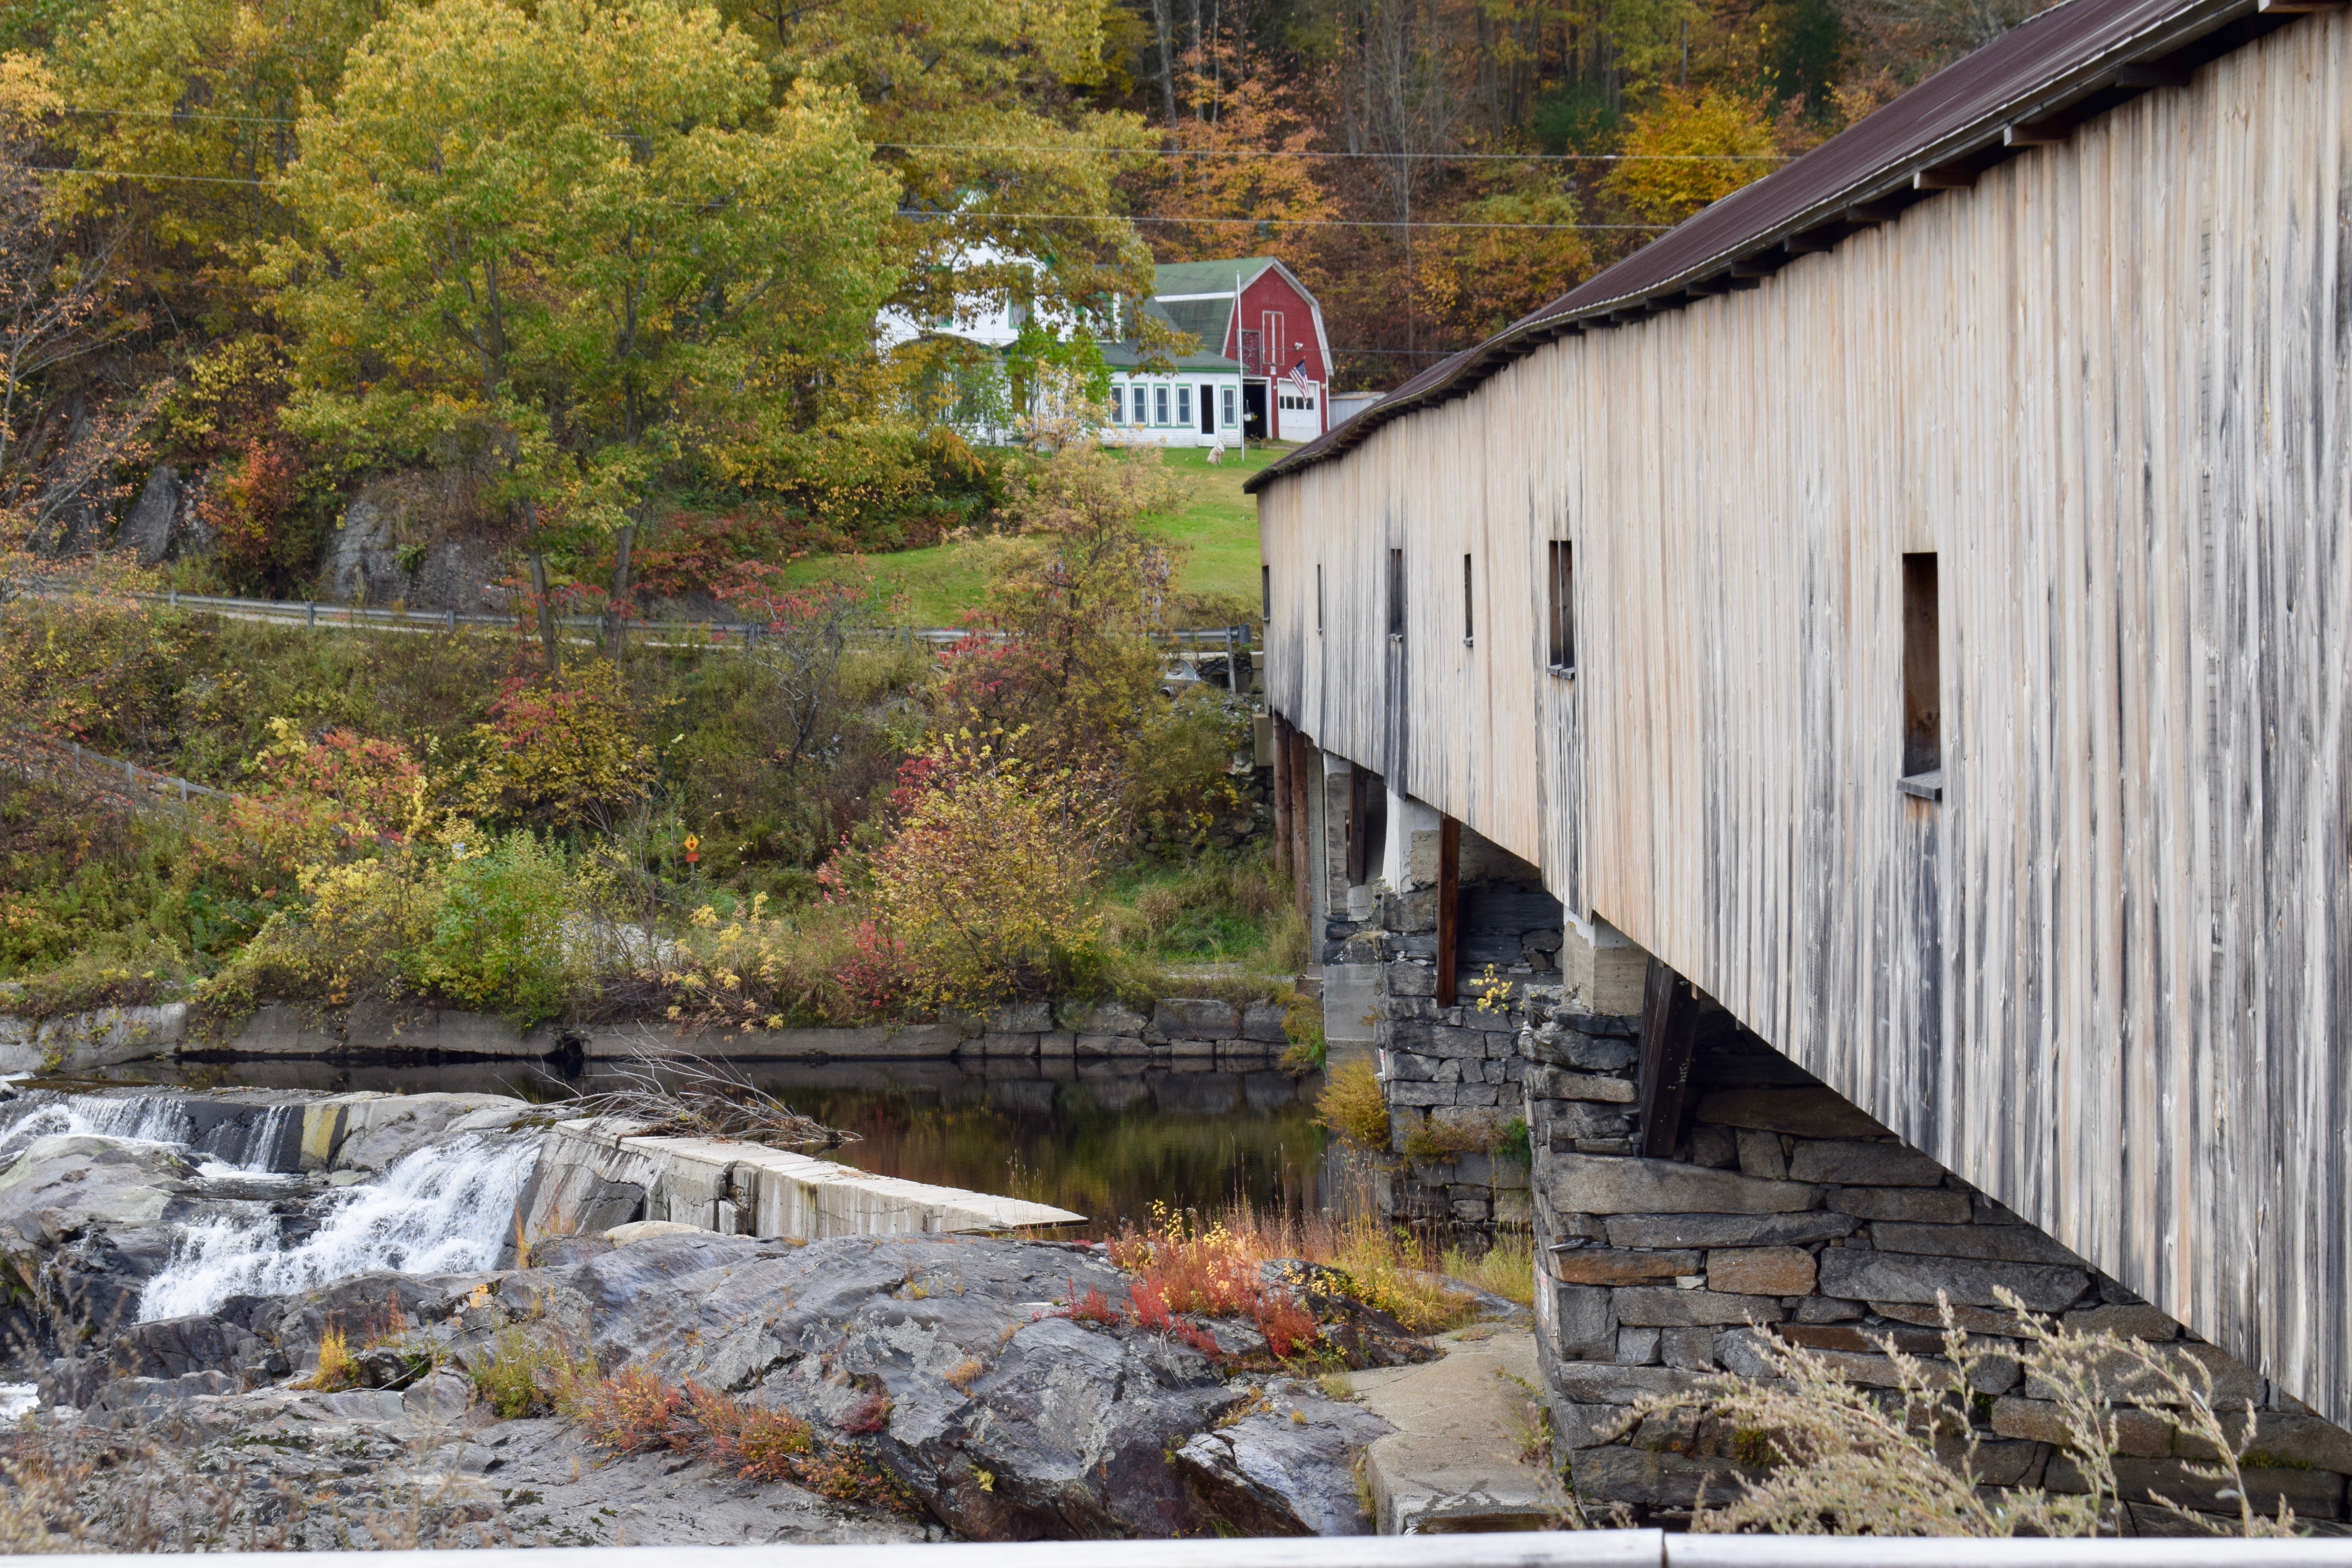 It's the weekend! Number 126, NH Covered Bridge, River and Red Barn